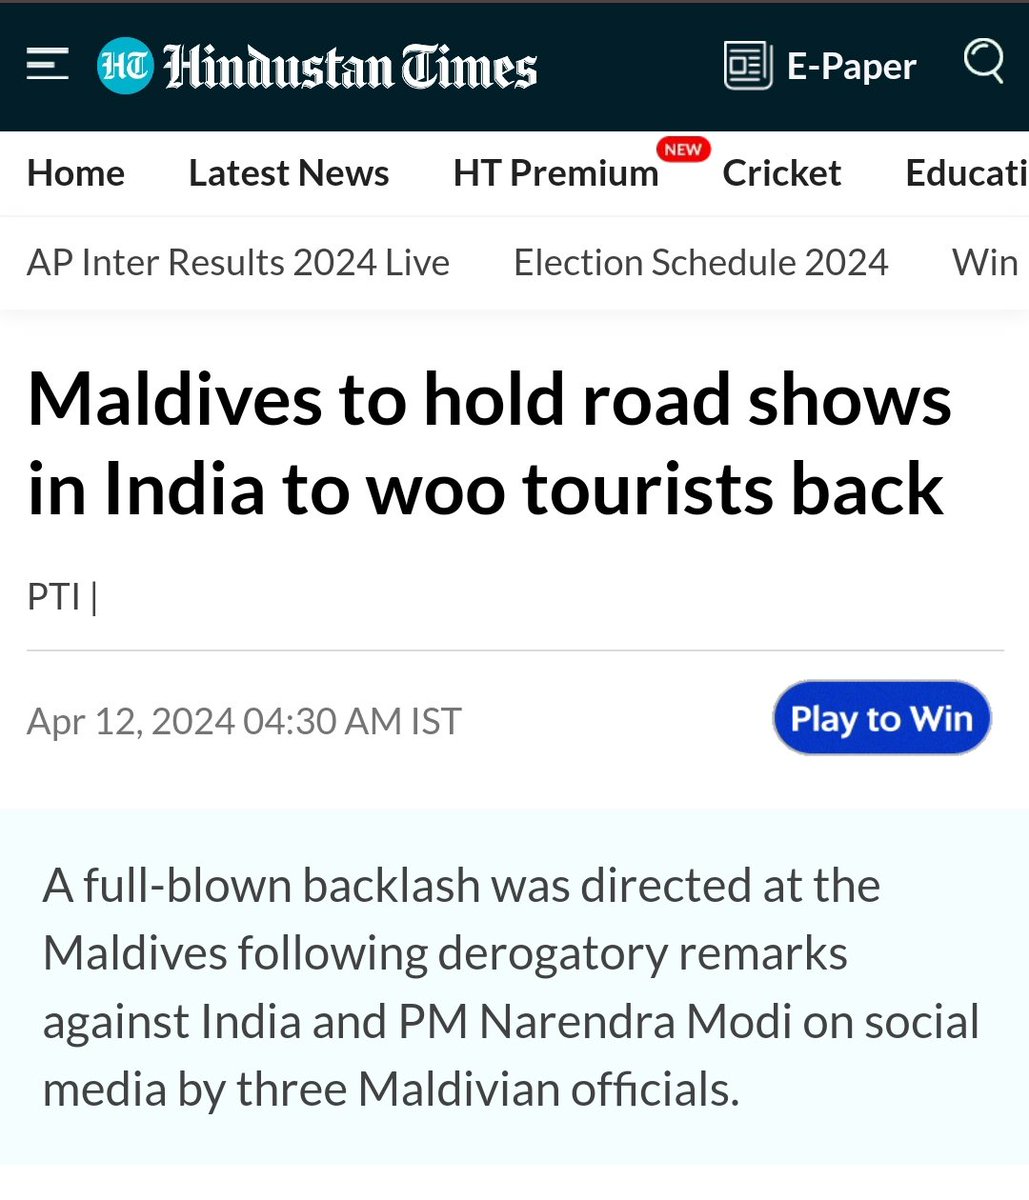 Few days back, Maldives President @MMuizzu was running #IndiaOut campaign. Now #Maldives will hold road shows in India to bring Indian tourists back. This is the power of Naya Bharat under leadership of PMModi 🔥 #AbkiBaar400Paar